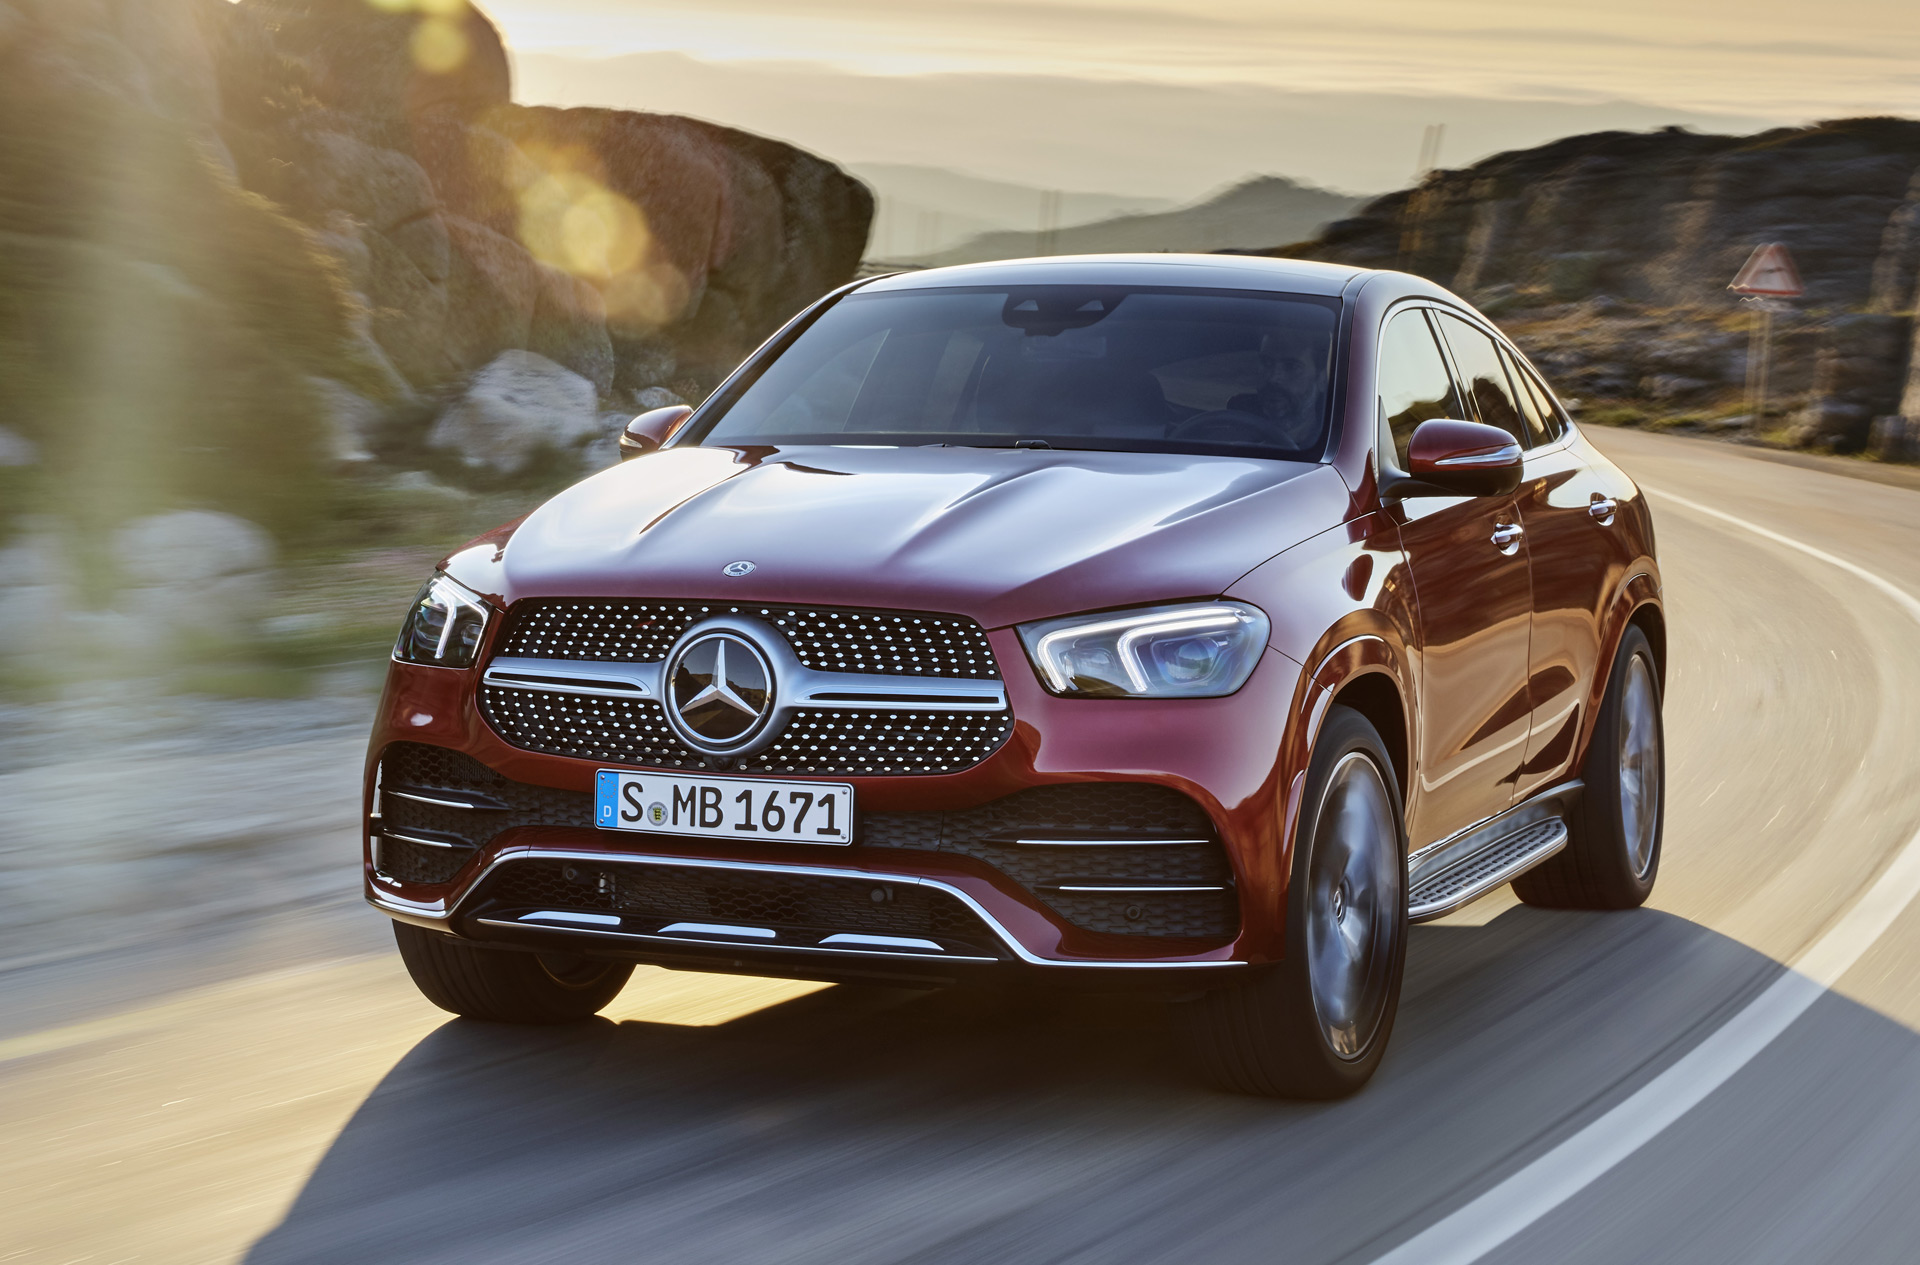 2021 Mercedes-Benz GLE Coupe dials up the style, luxury